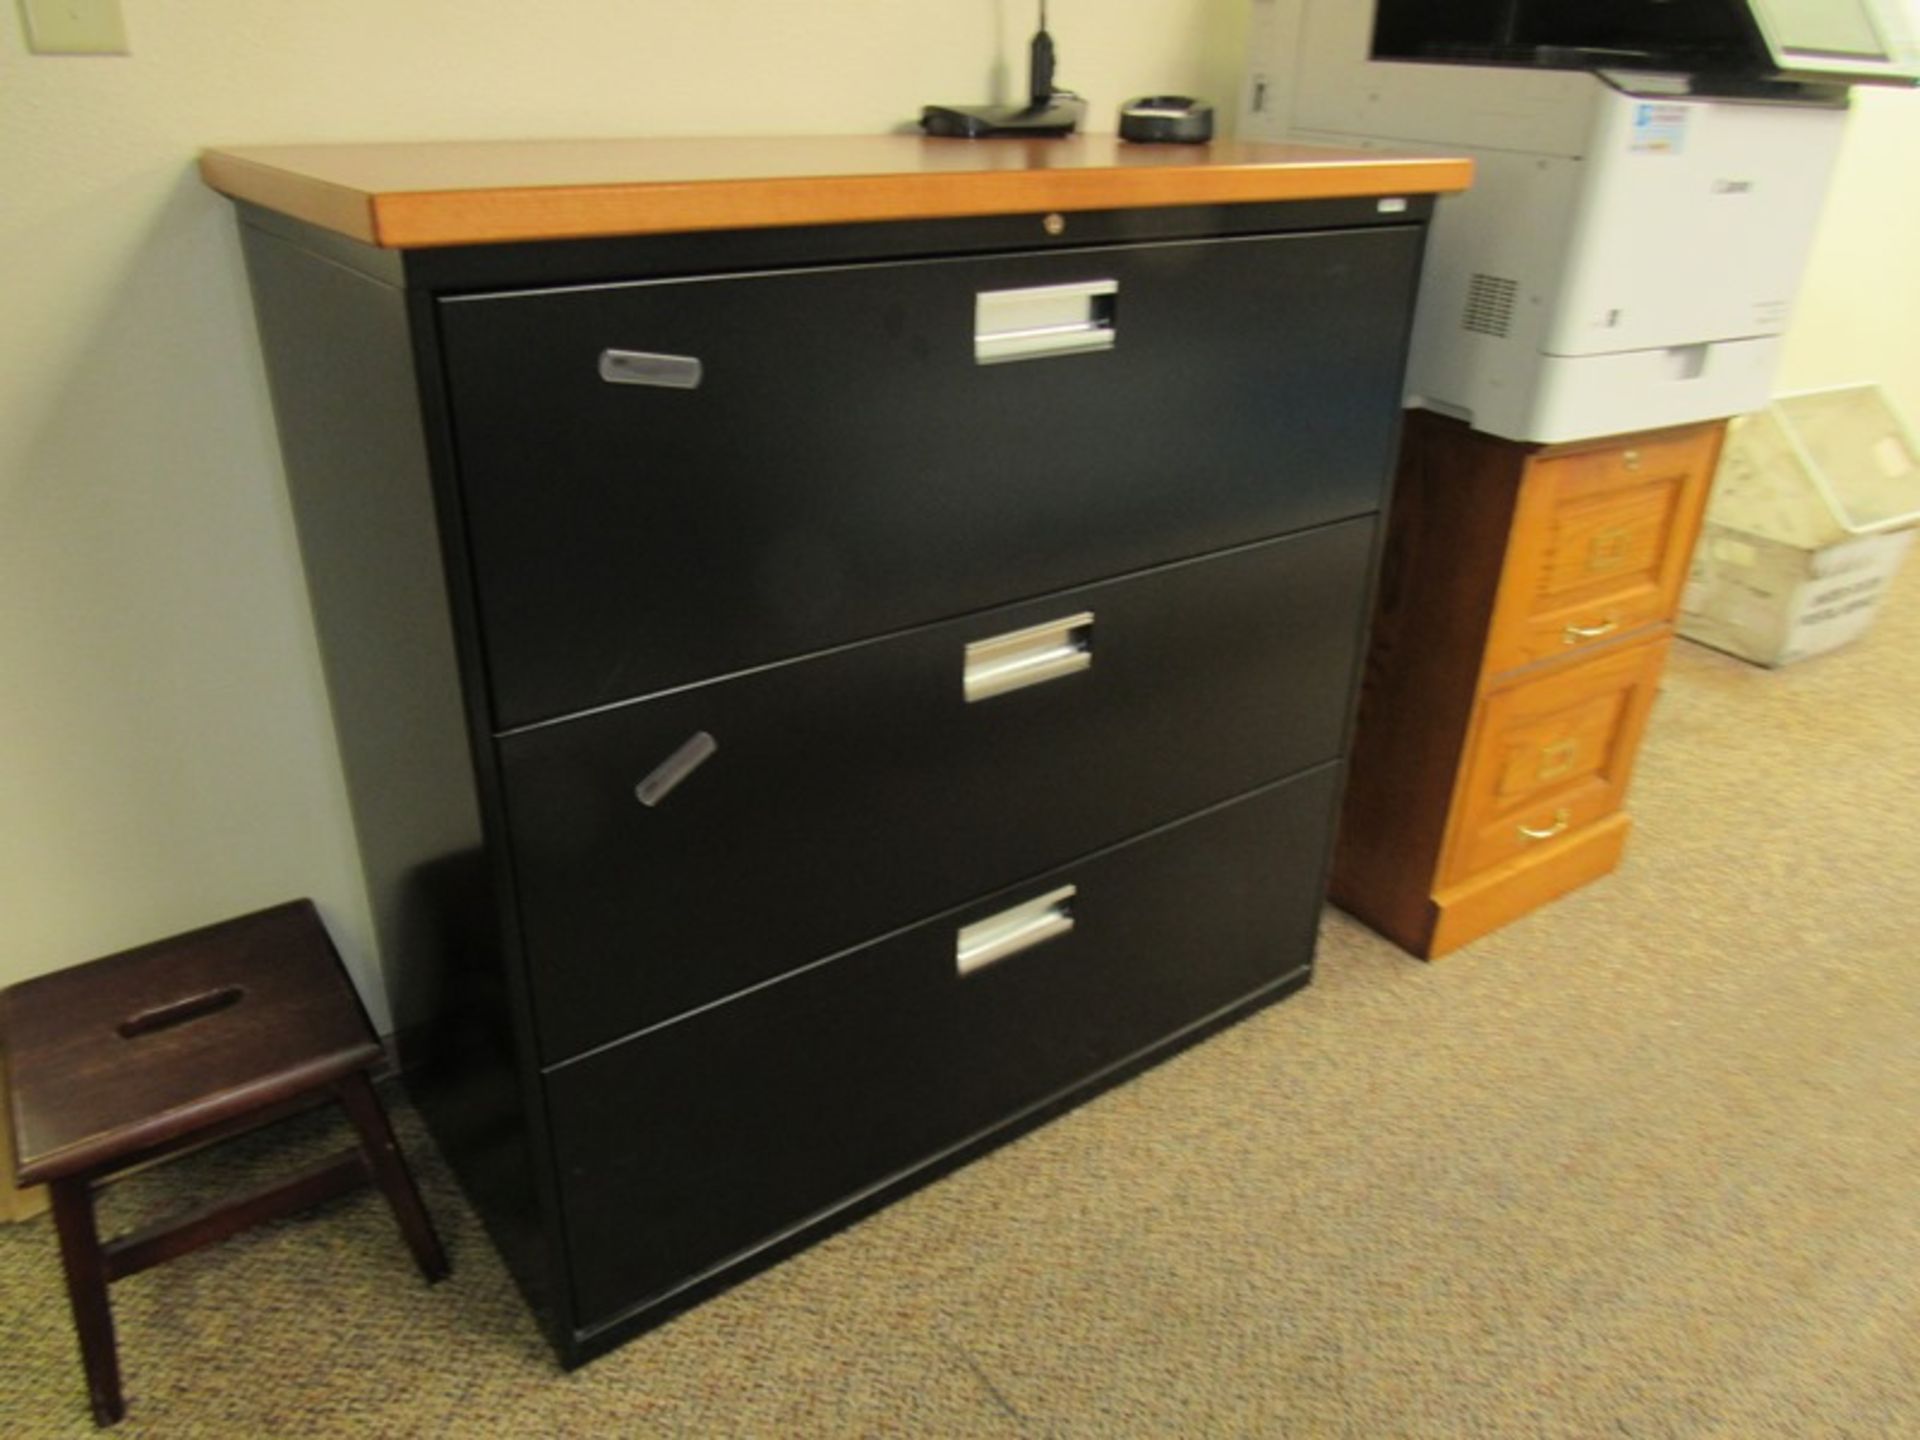 Lot Hallway, (4) 3-Drawer Lateral Files, Shelving Unit, File Cabinet (No Electronics or Tagged Items - Image 2 of 3